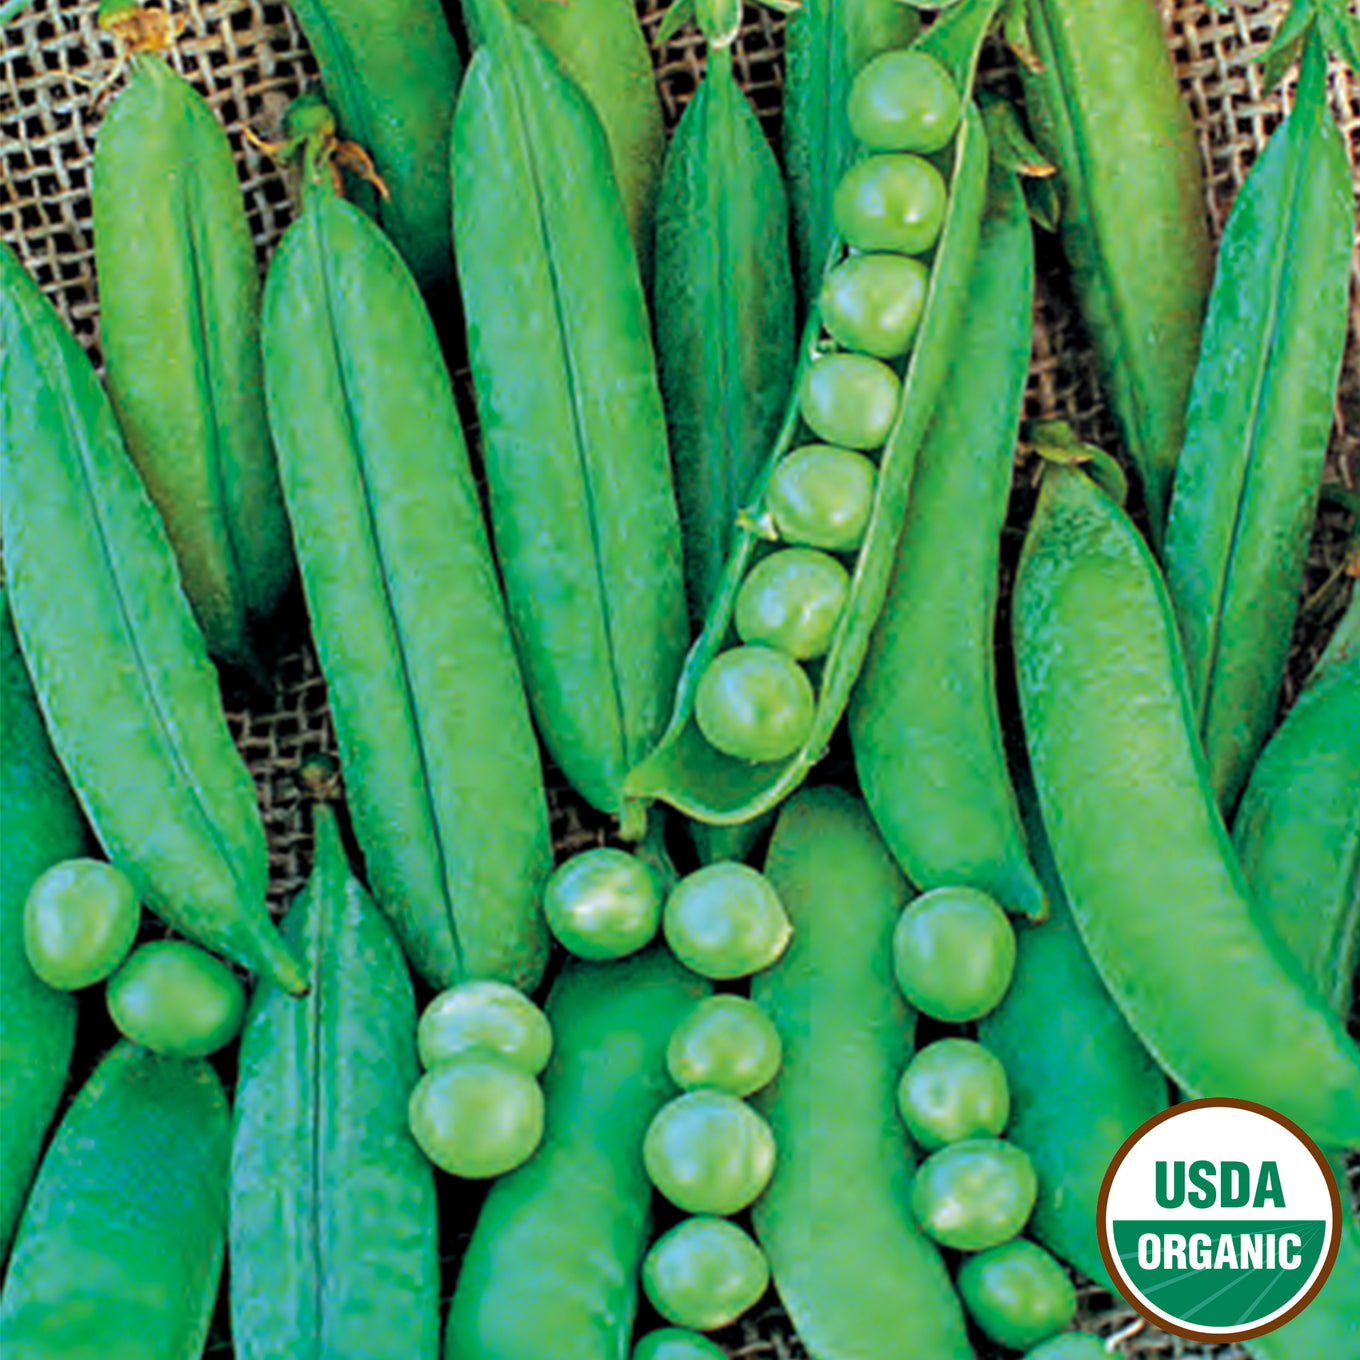 Green Arrow Organic Pea seeds from Ferry Morse fully matured and harvested with one pea pod open to show peas inside.